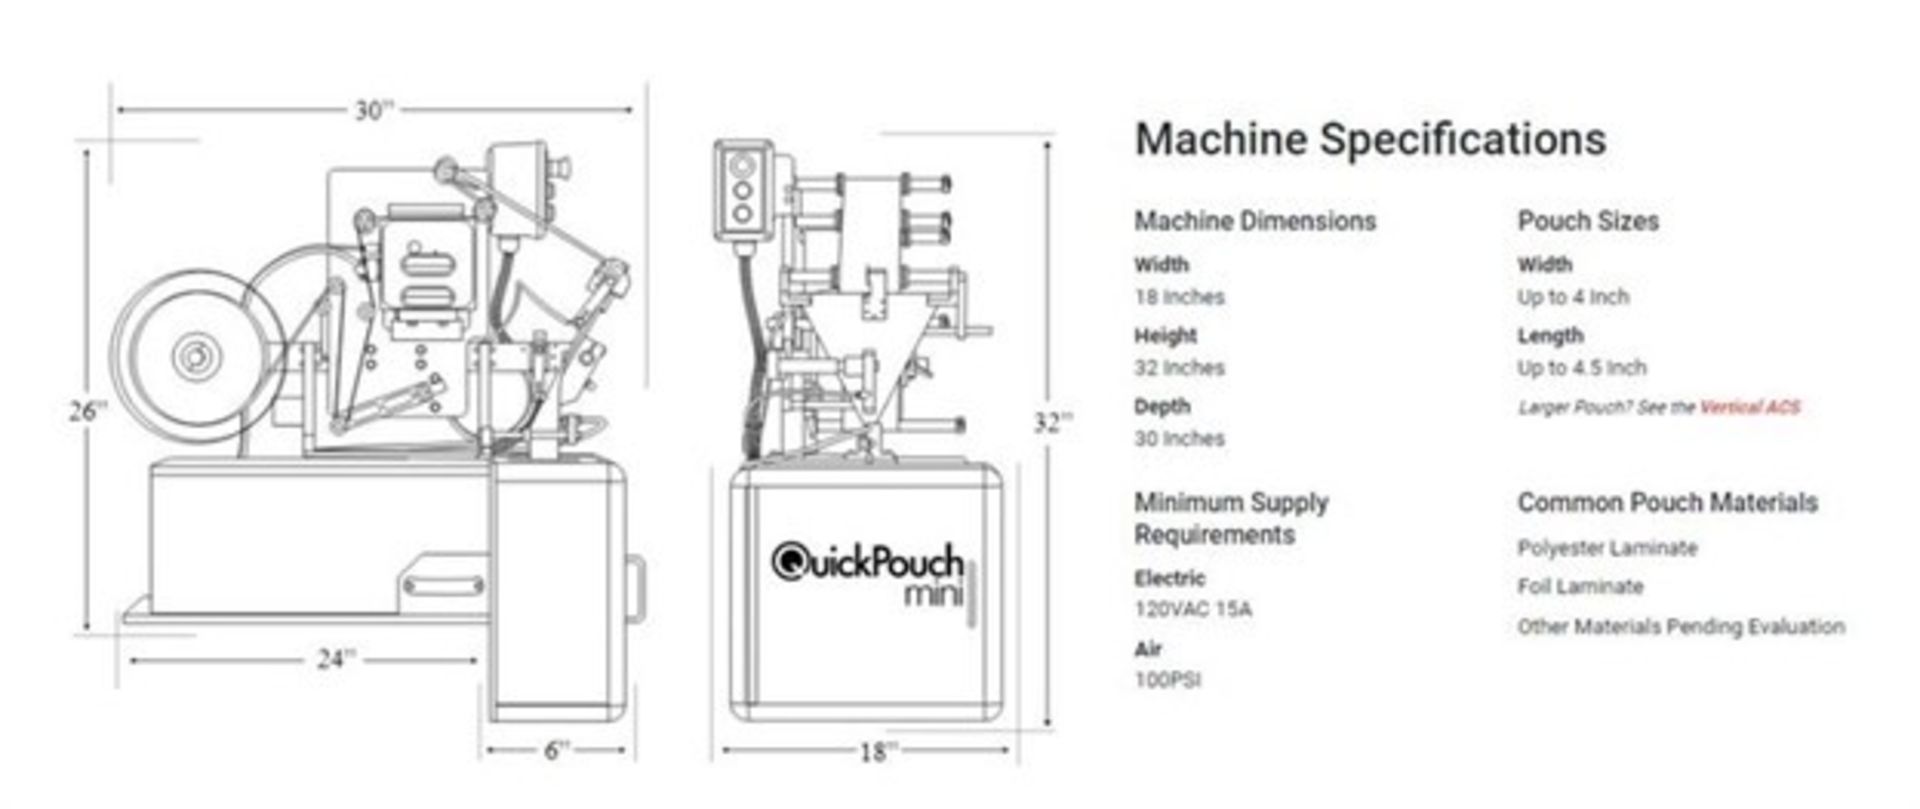 Quickpouch Mini Form, Fill and Seal Machine, Model QuickPouch - Mini, S/N 15071-1190, Desktop - Image 8 of 8